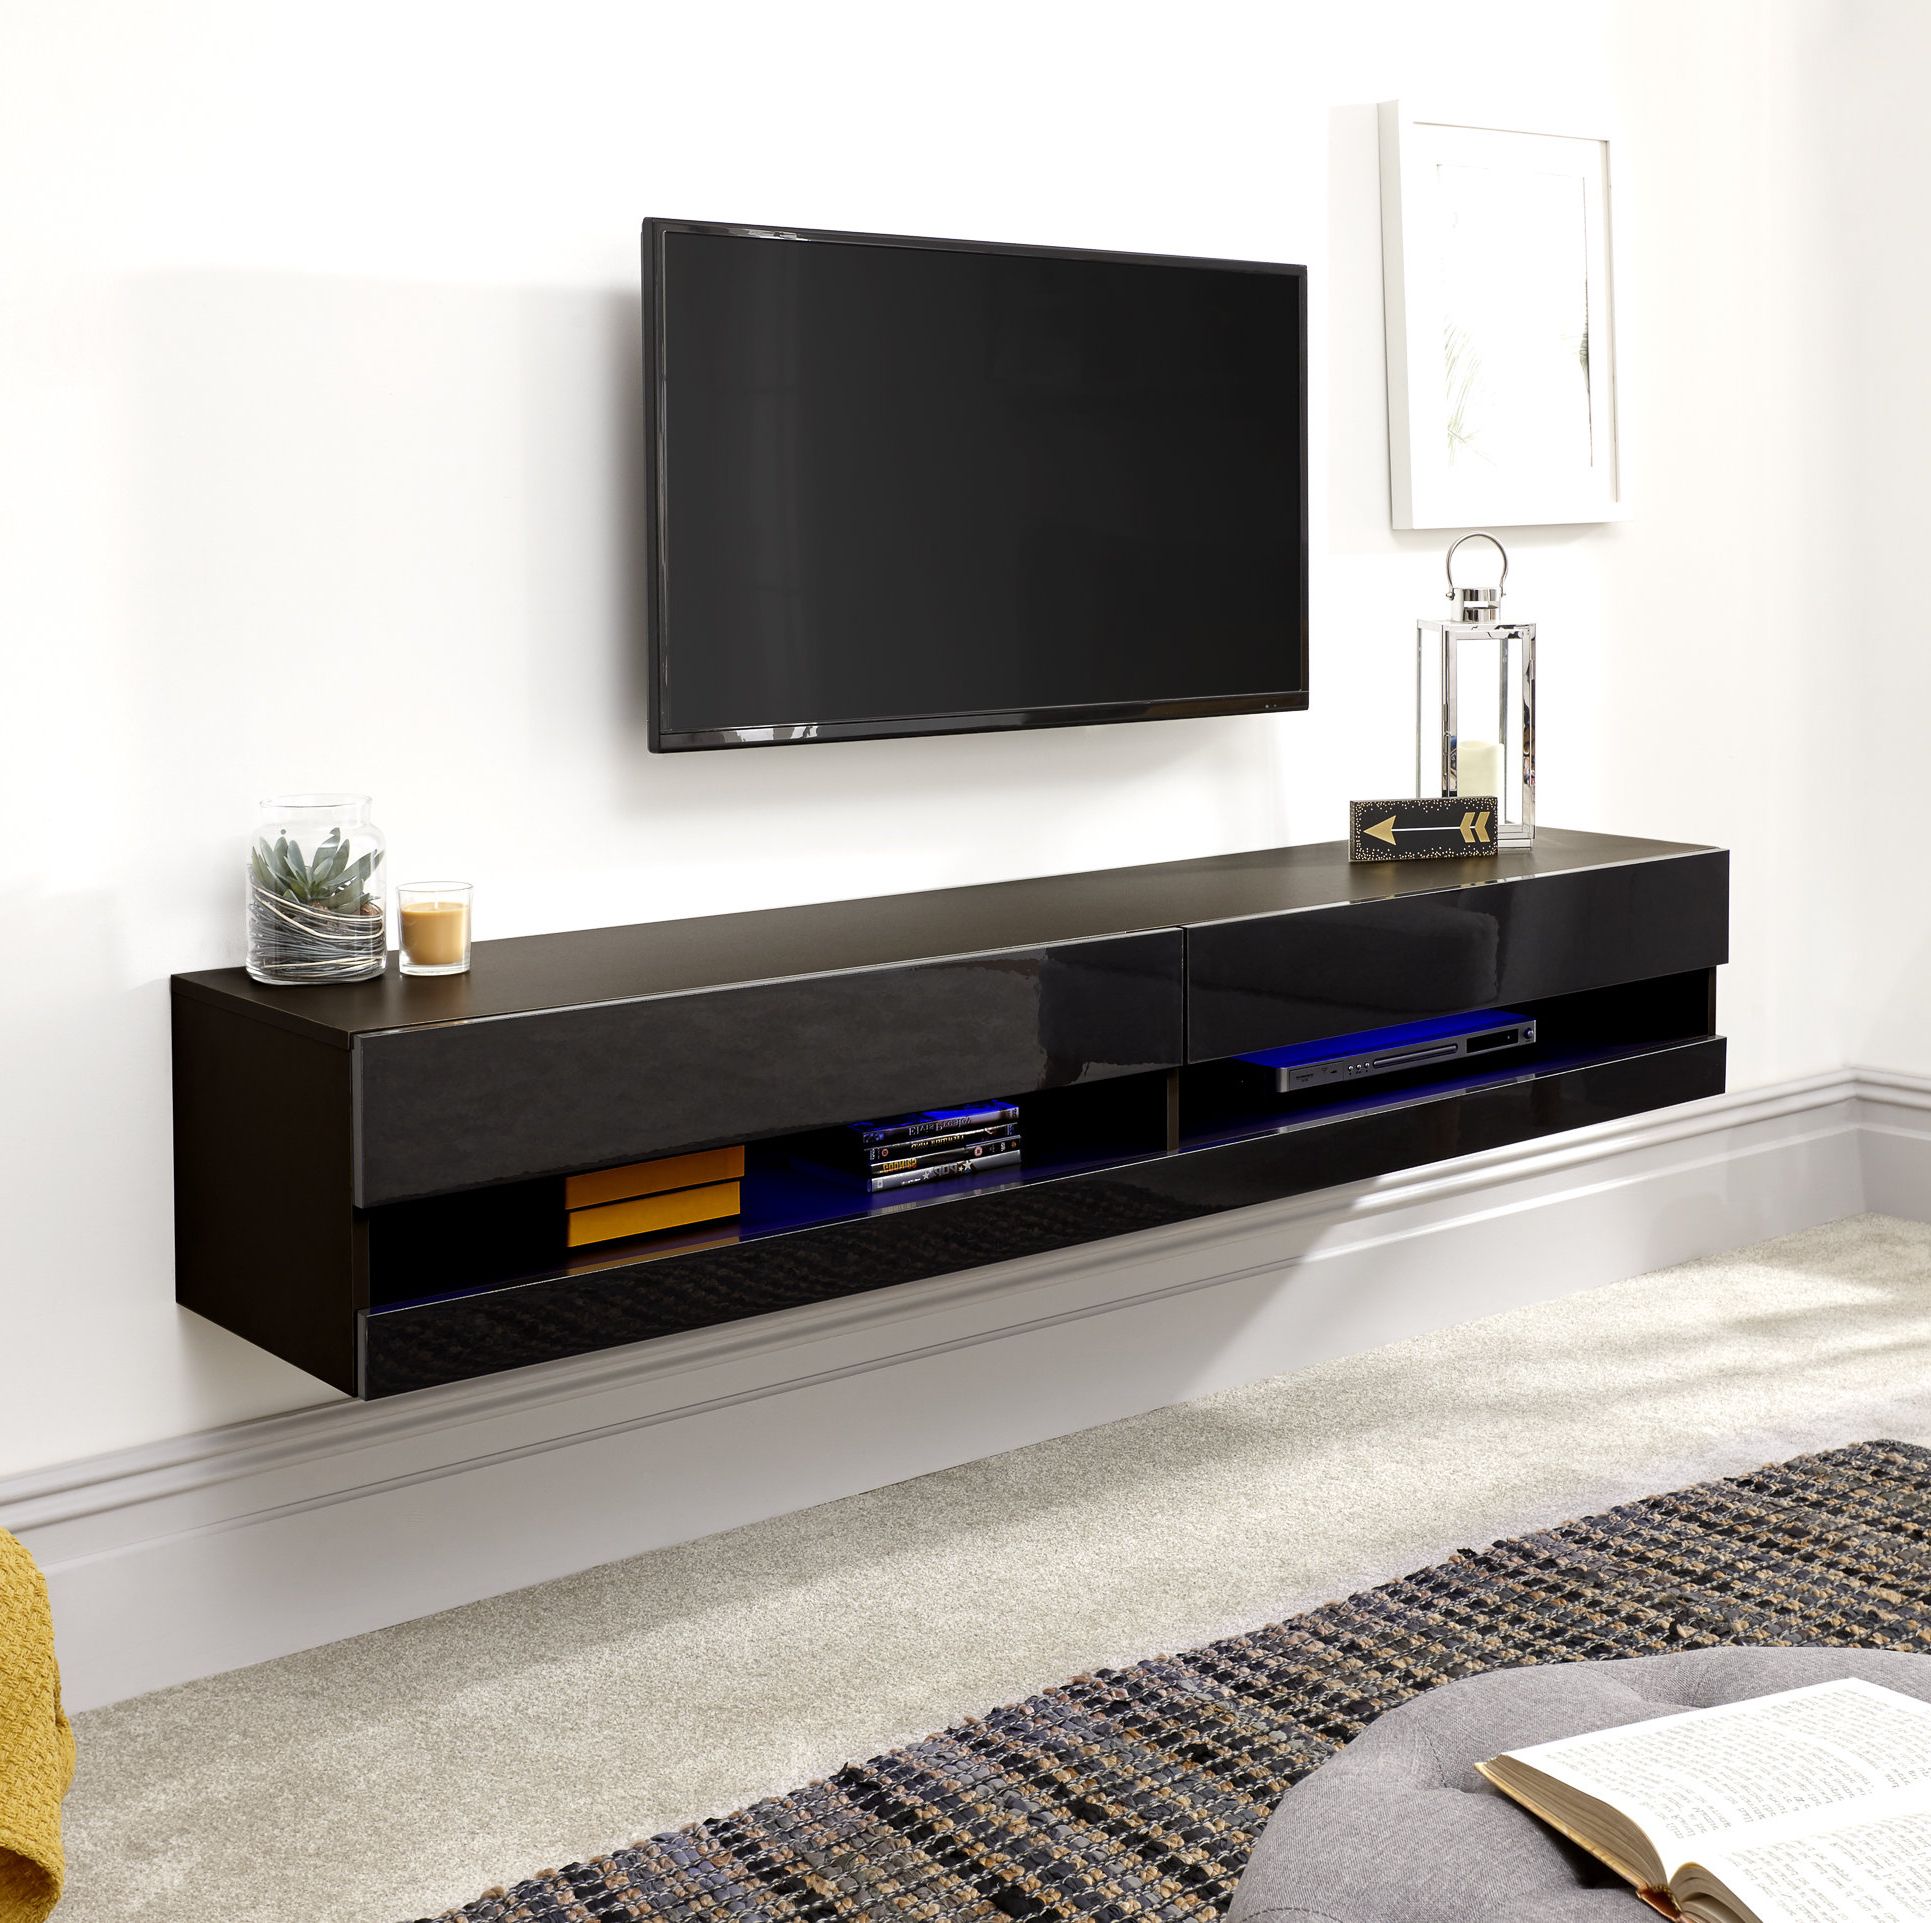 Most Popular Modern Tv Stands You'll Love (View 8 of 20)